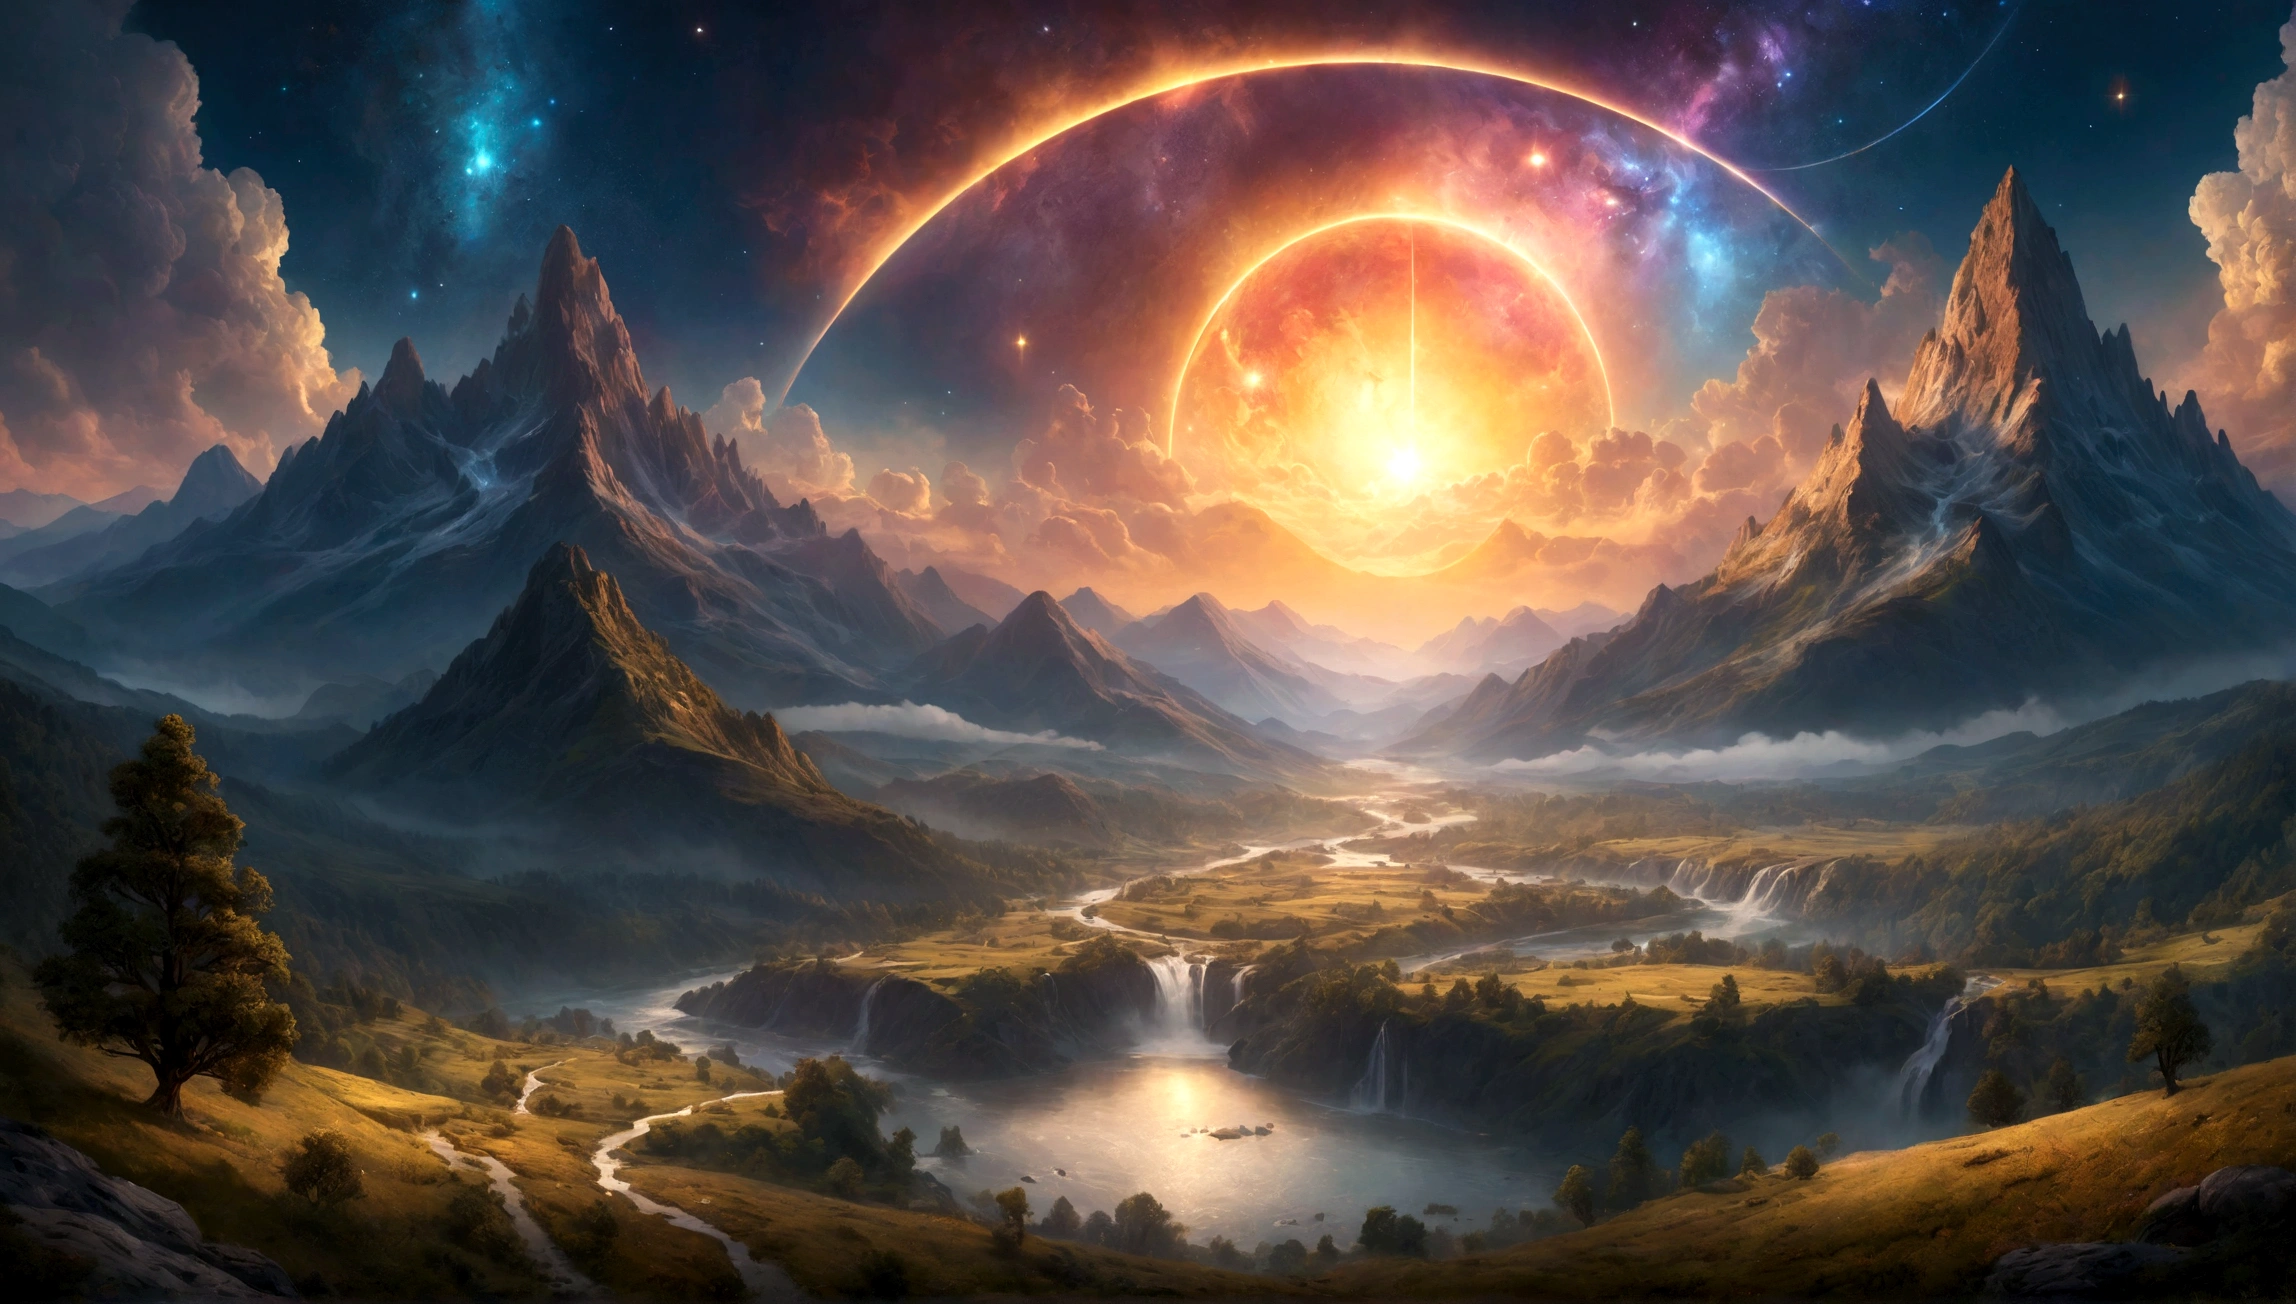 a vast cosmic landscape, the moment of creation, a gigantic explosion of light and energy, swirling clouds of cosmic dust, glowing nebulae, distant galaxies, intricate fractal patterns, ethereal energy fields, celestial bodies in motion, surreal otherworldly atmosphere, vibrant colors, dramatic lighting, photorealistic, cinematic, epic scale, highly detailed, 8k, award winning sci-fi concept art